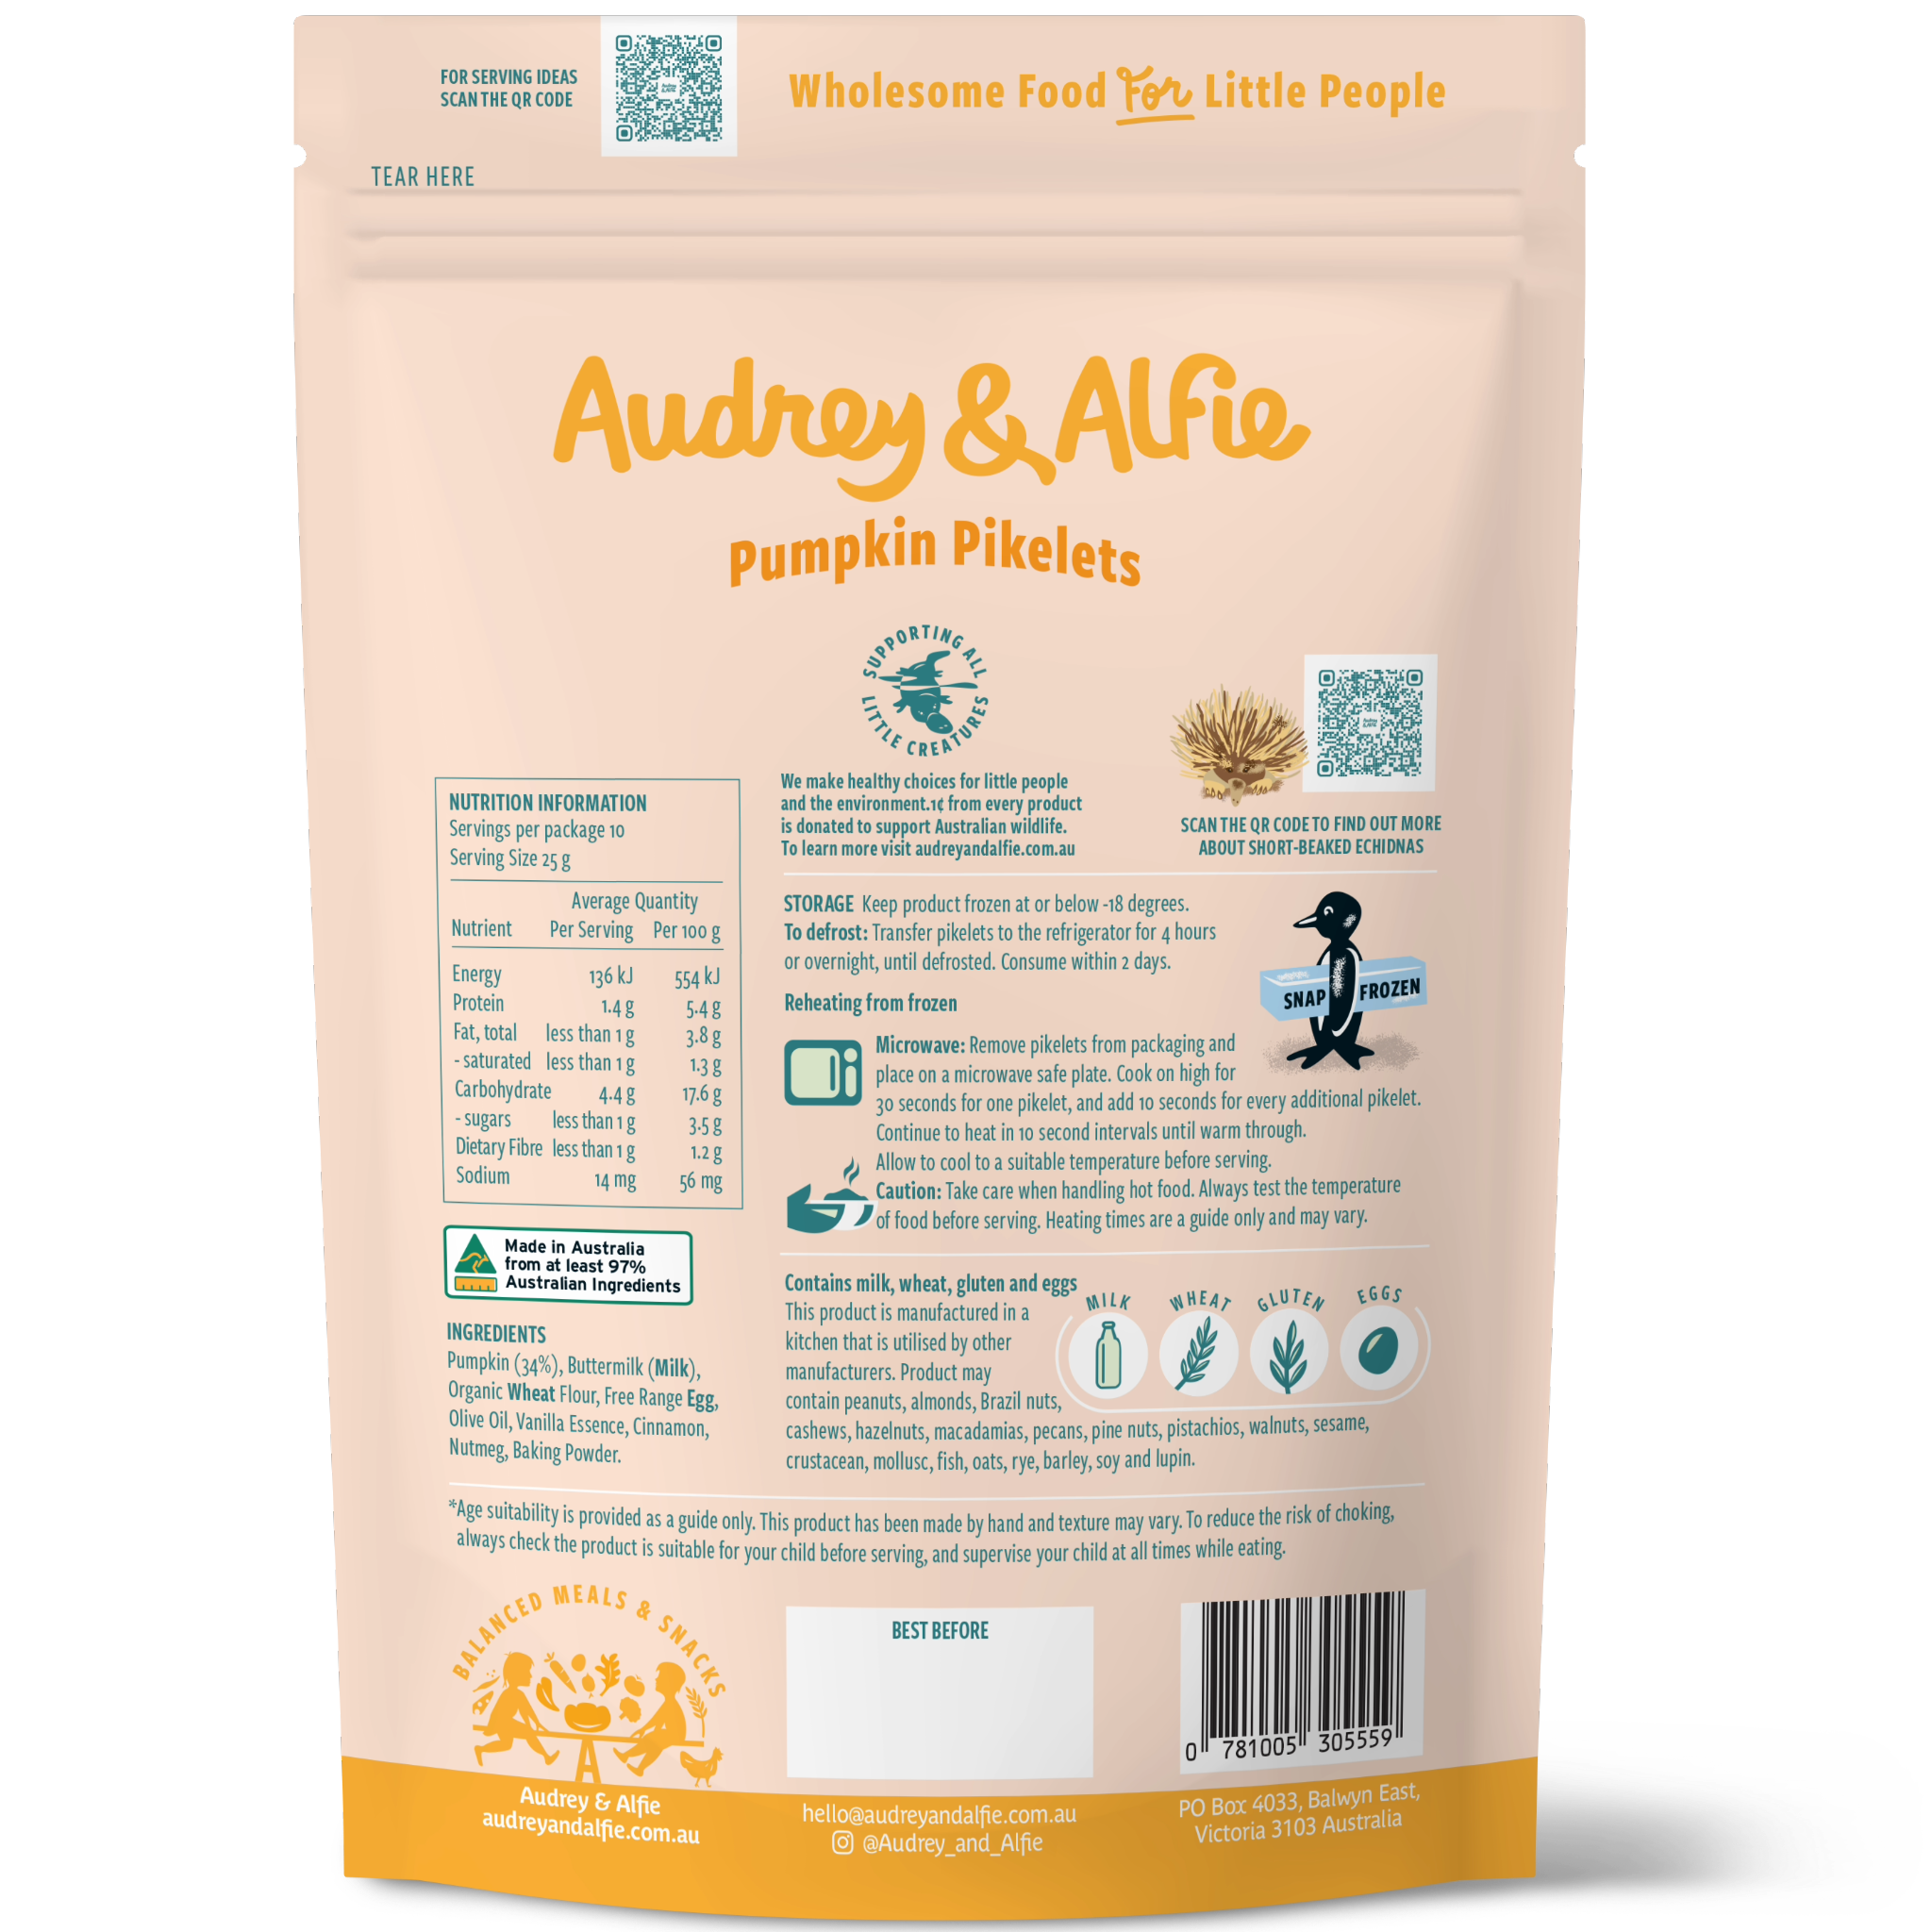 Pumpkin Pikelets from Audrey and Alfie - Back of Packet with Nutrition Information Panel